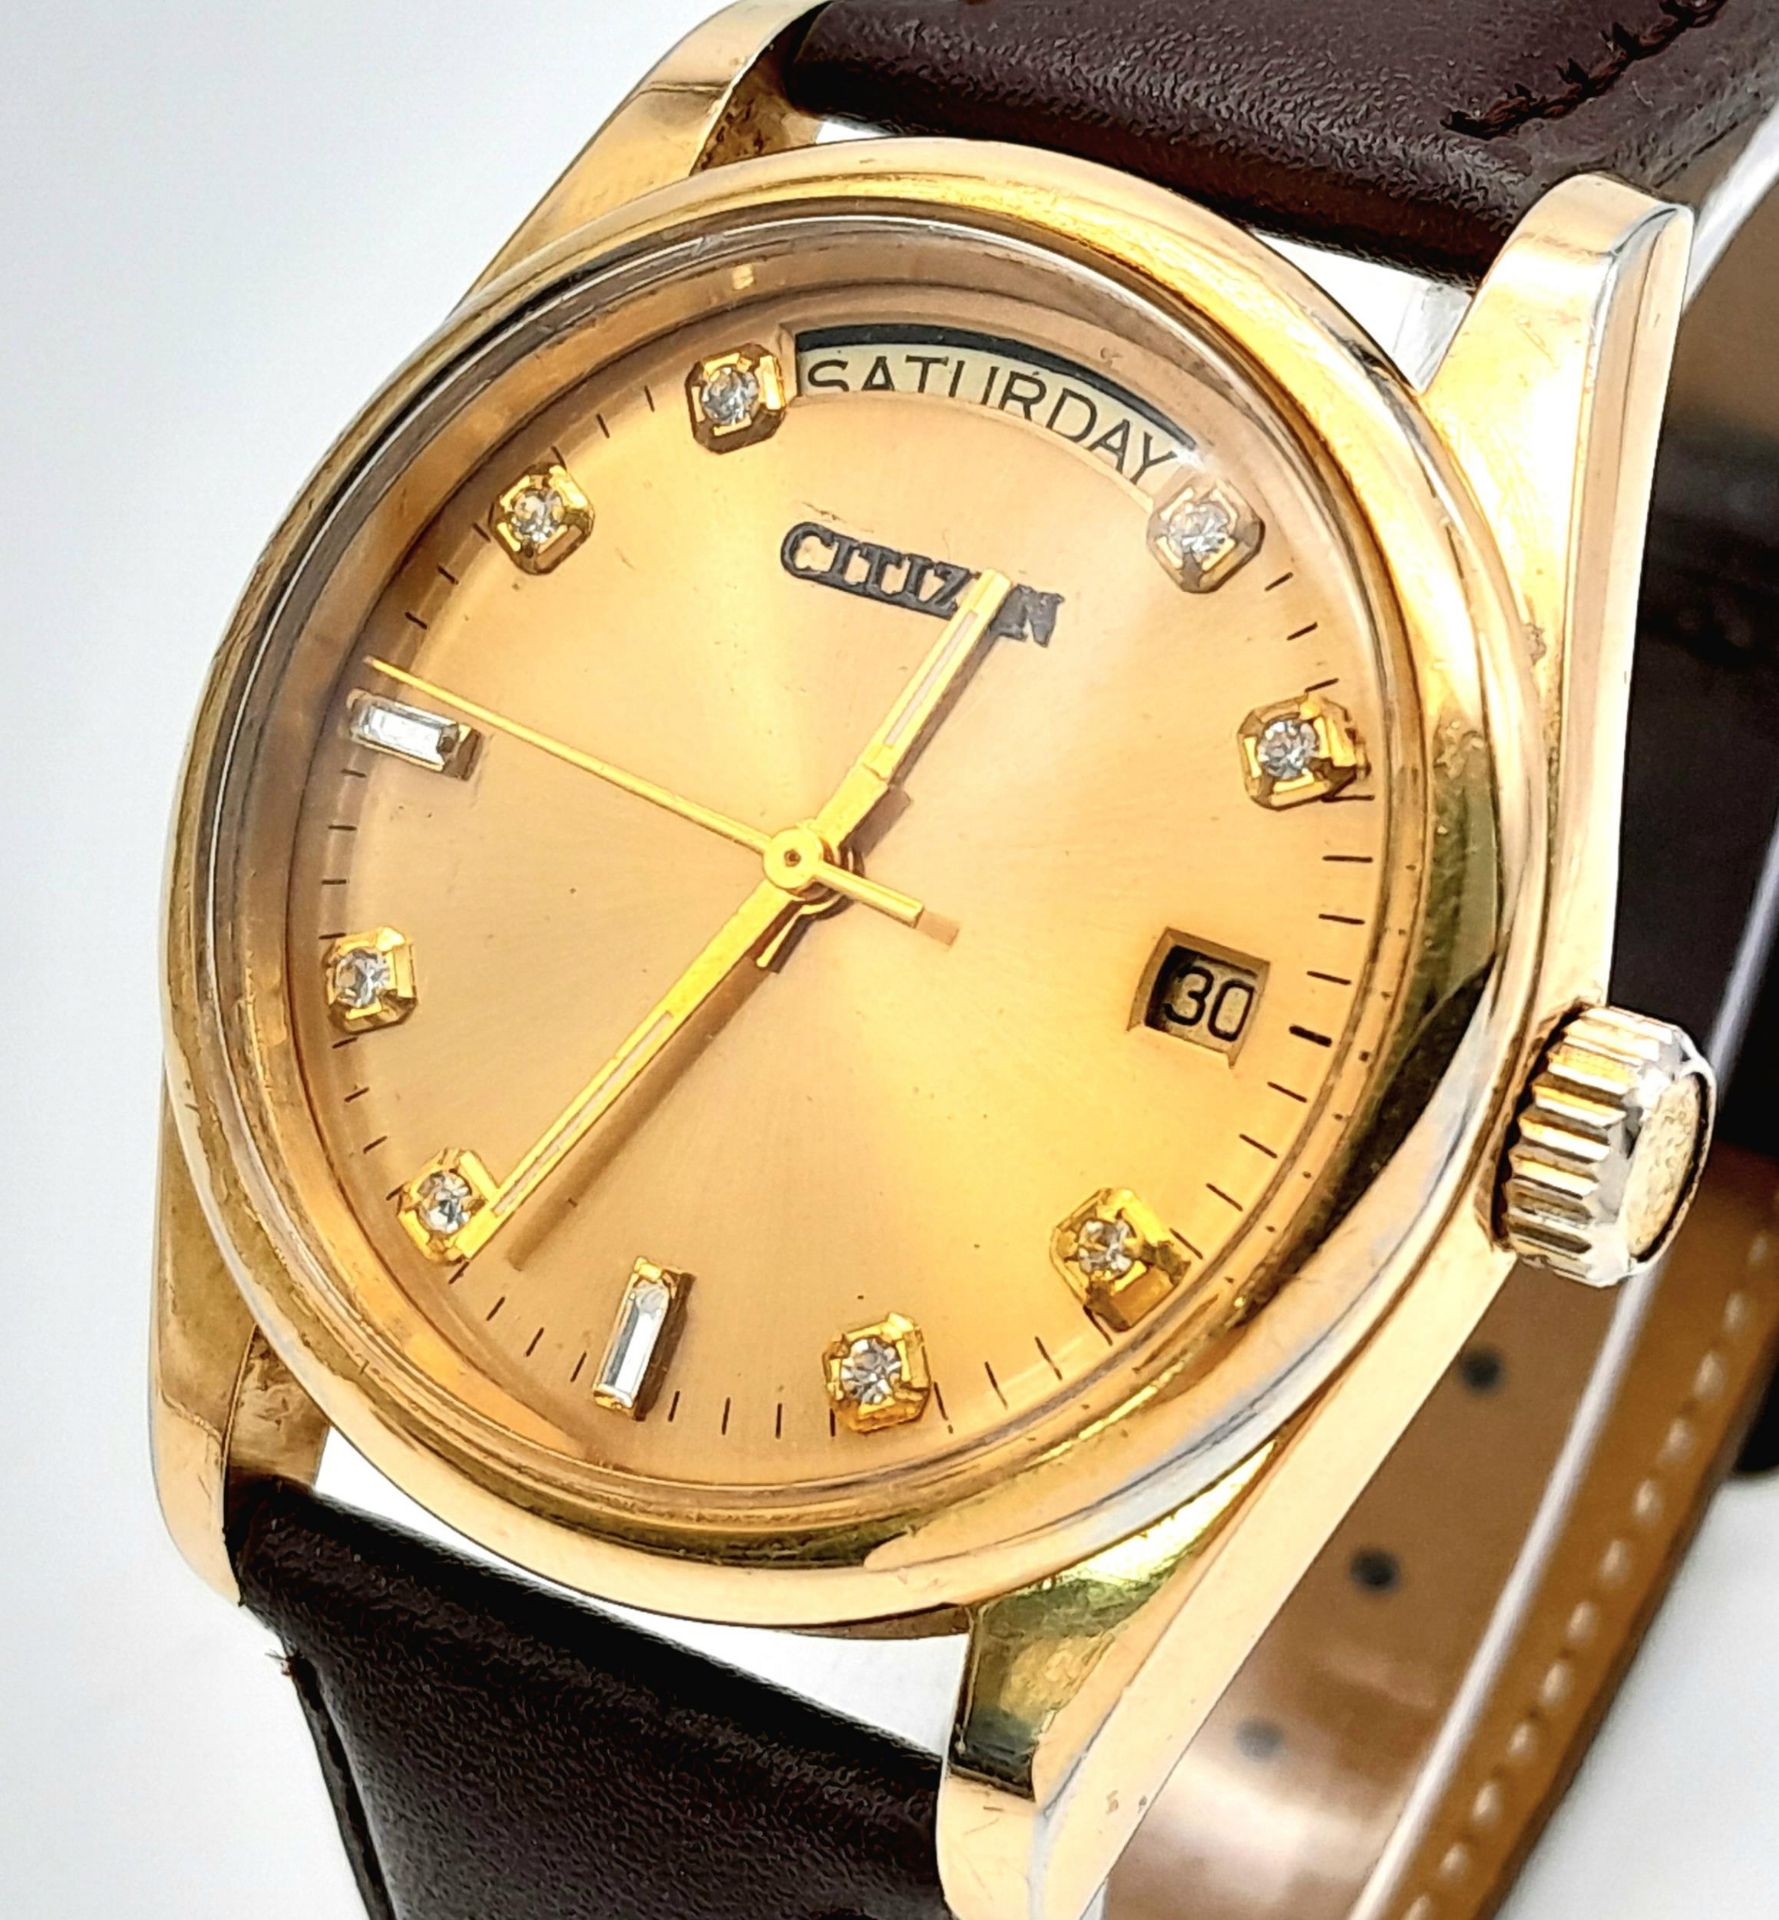 A Citizen Automatic Stone Set Watch. Brown leather strap. Gold plated case - 36mm. Gold tone dial - Bild 2 aus 6